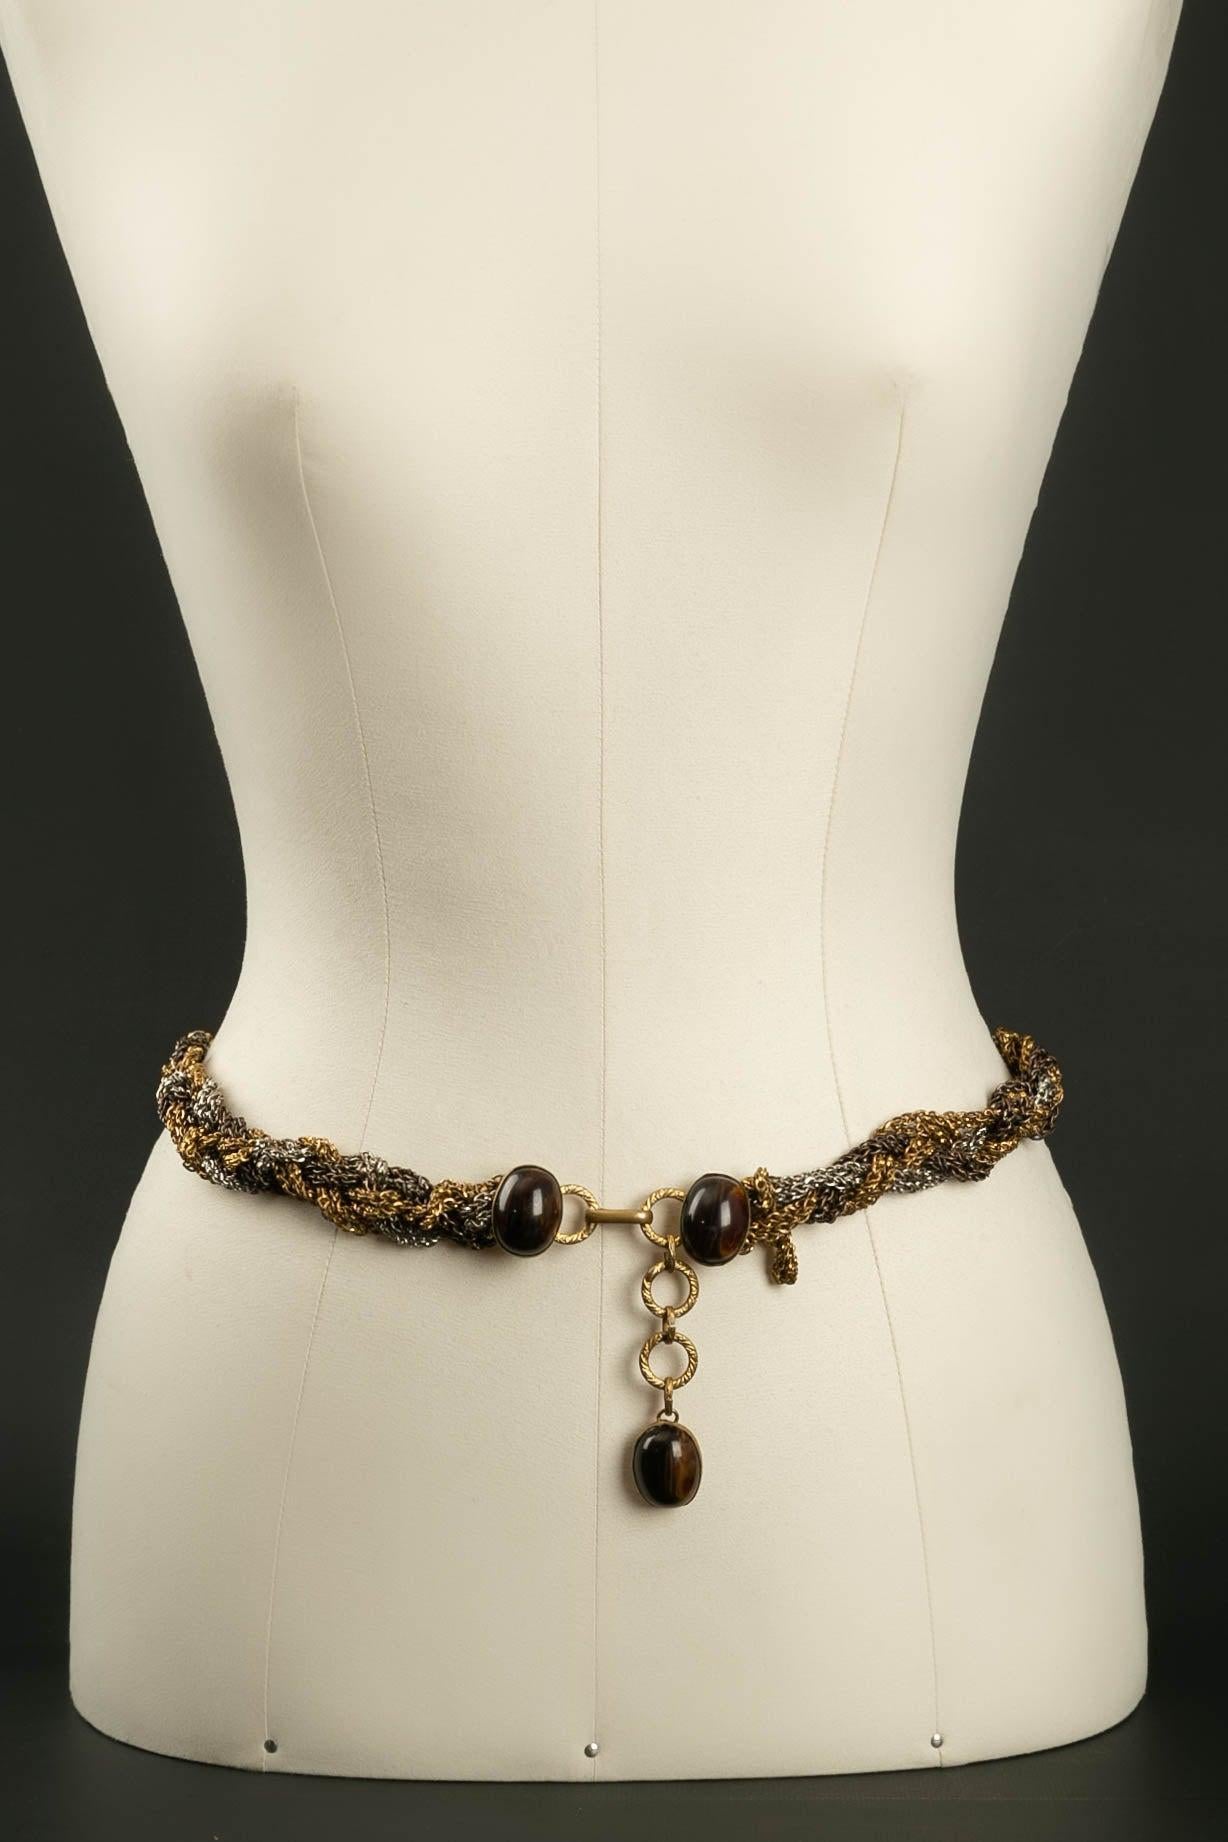 Yves Saint Laurent Intertwined Chains Belt, 1960s-1970 For Sale 1